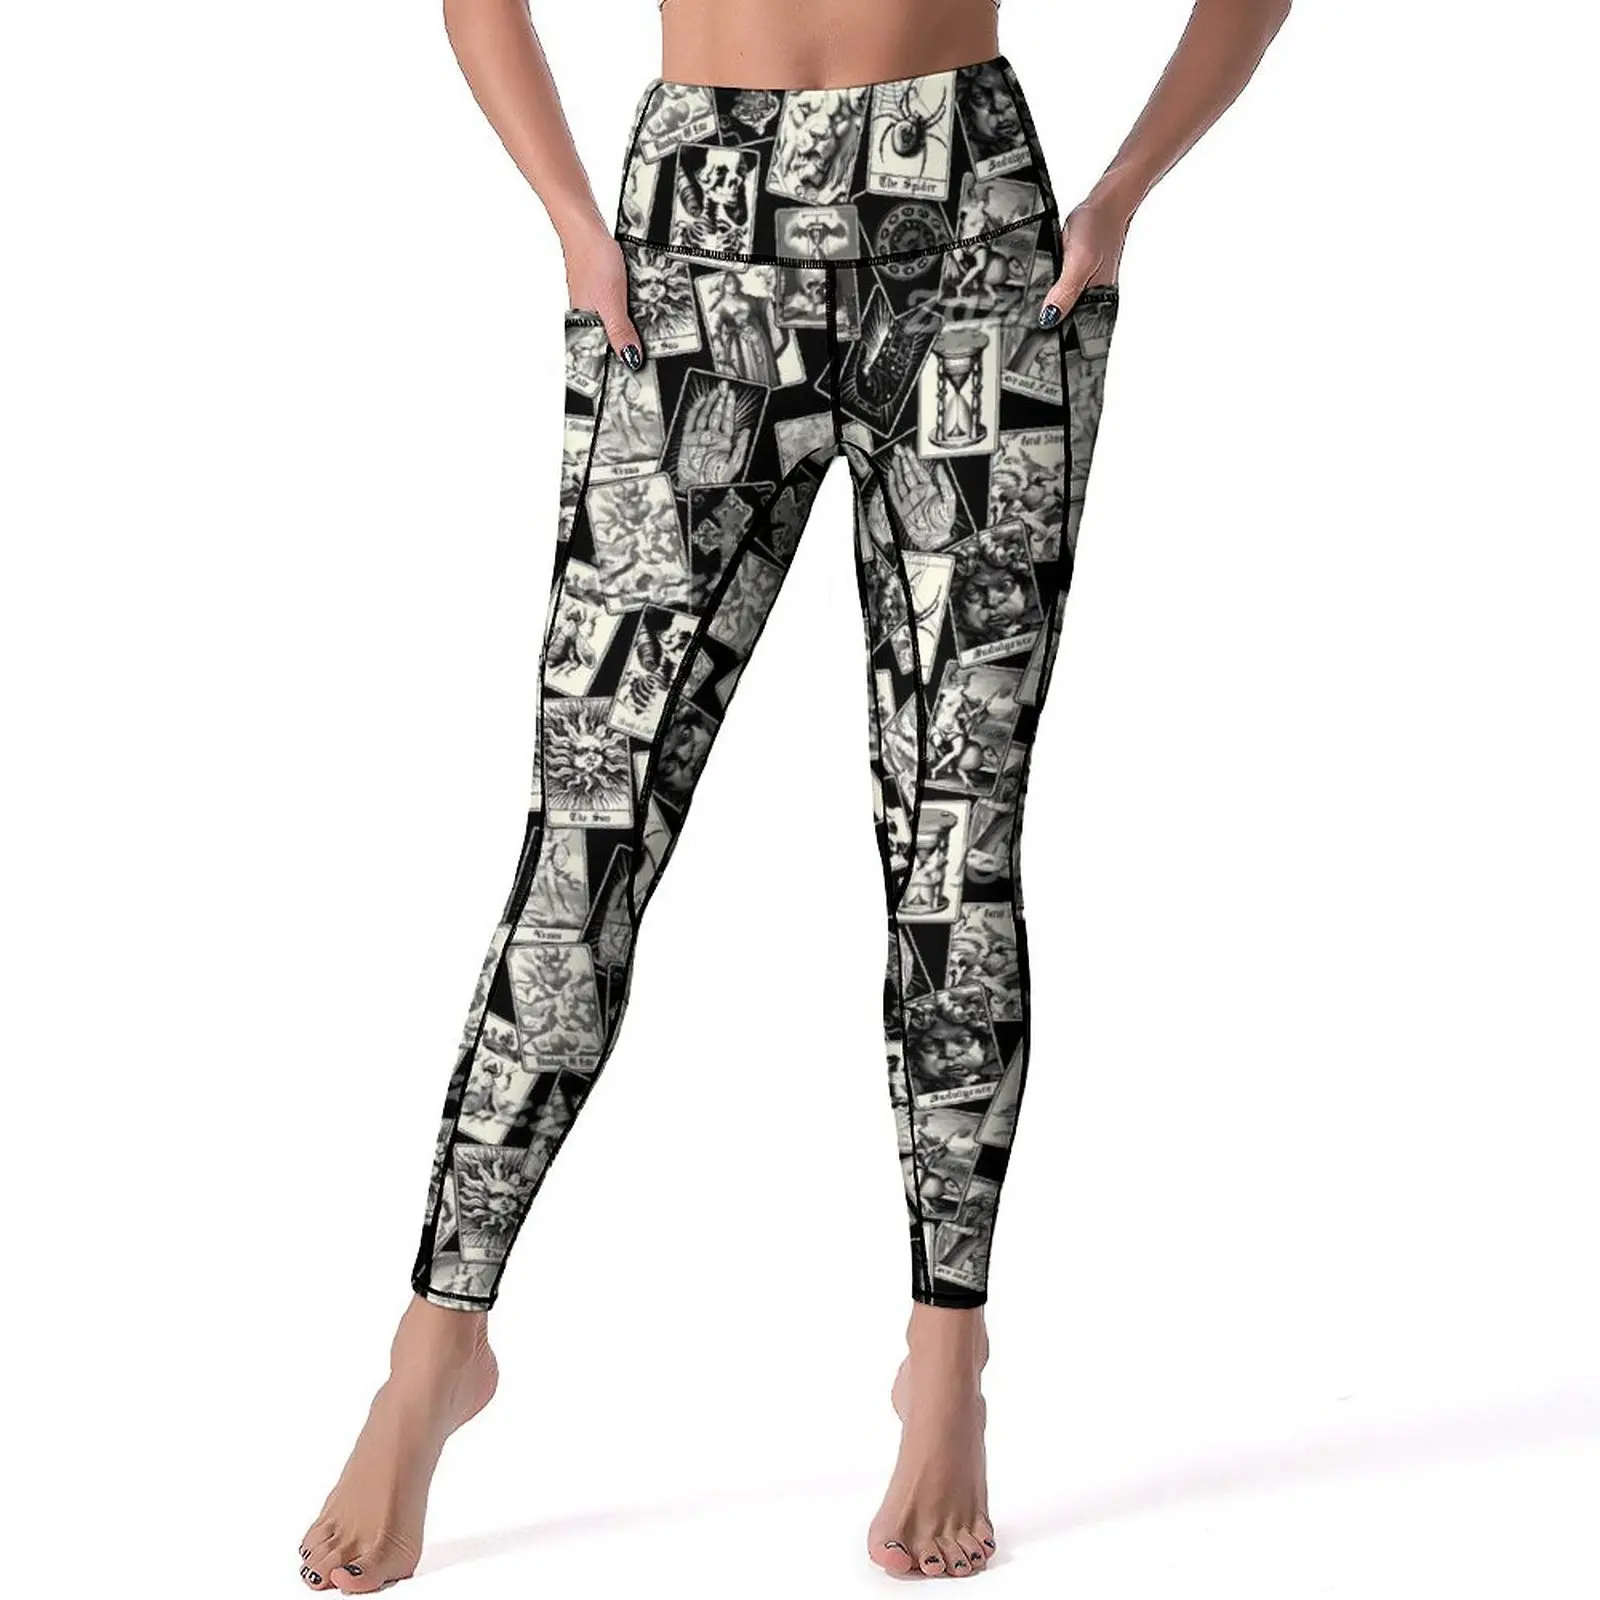 

Tarot Card Yoga Pants Sexy Witchcraft Goth Fortune Teller Leggings High Waist Workout Leggins Lady Retro Stretch Sports Tights